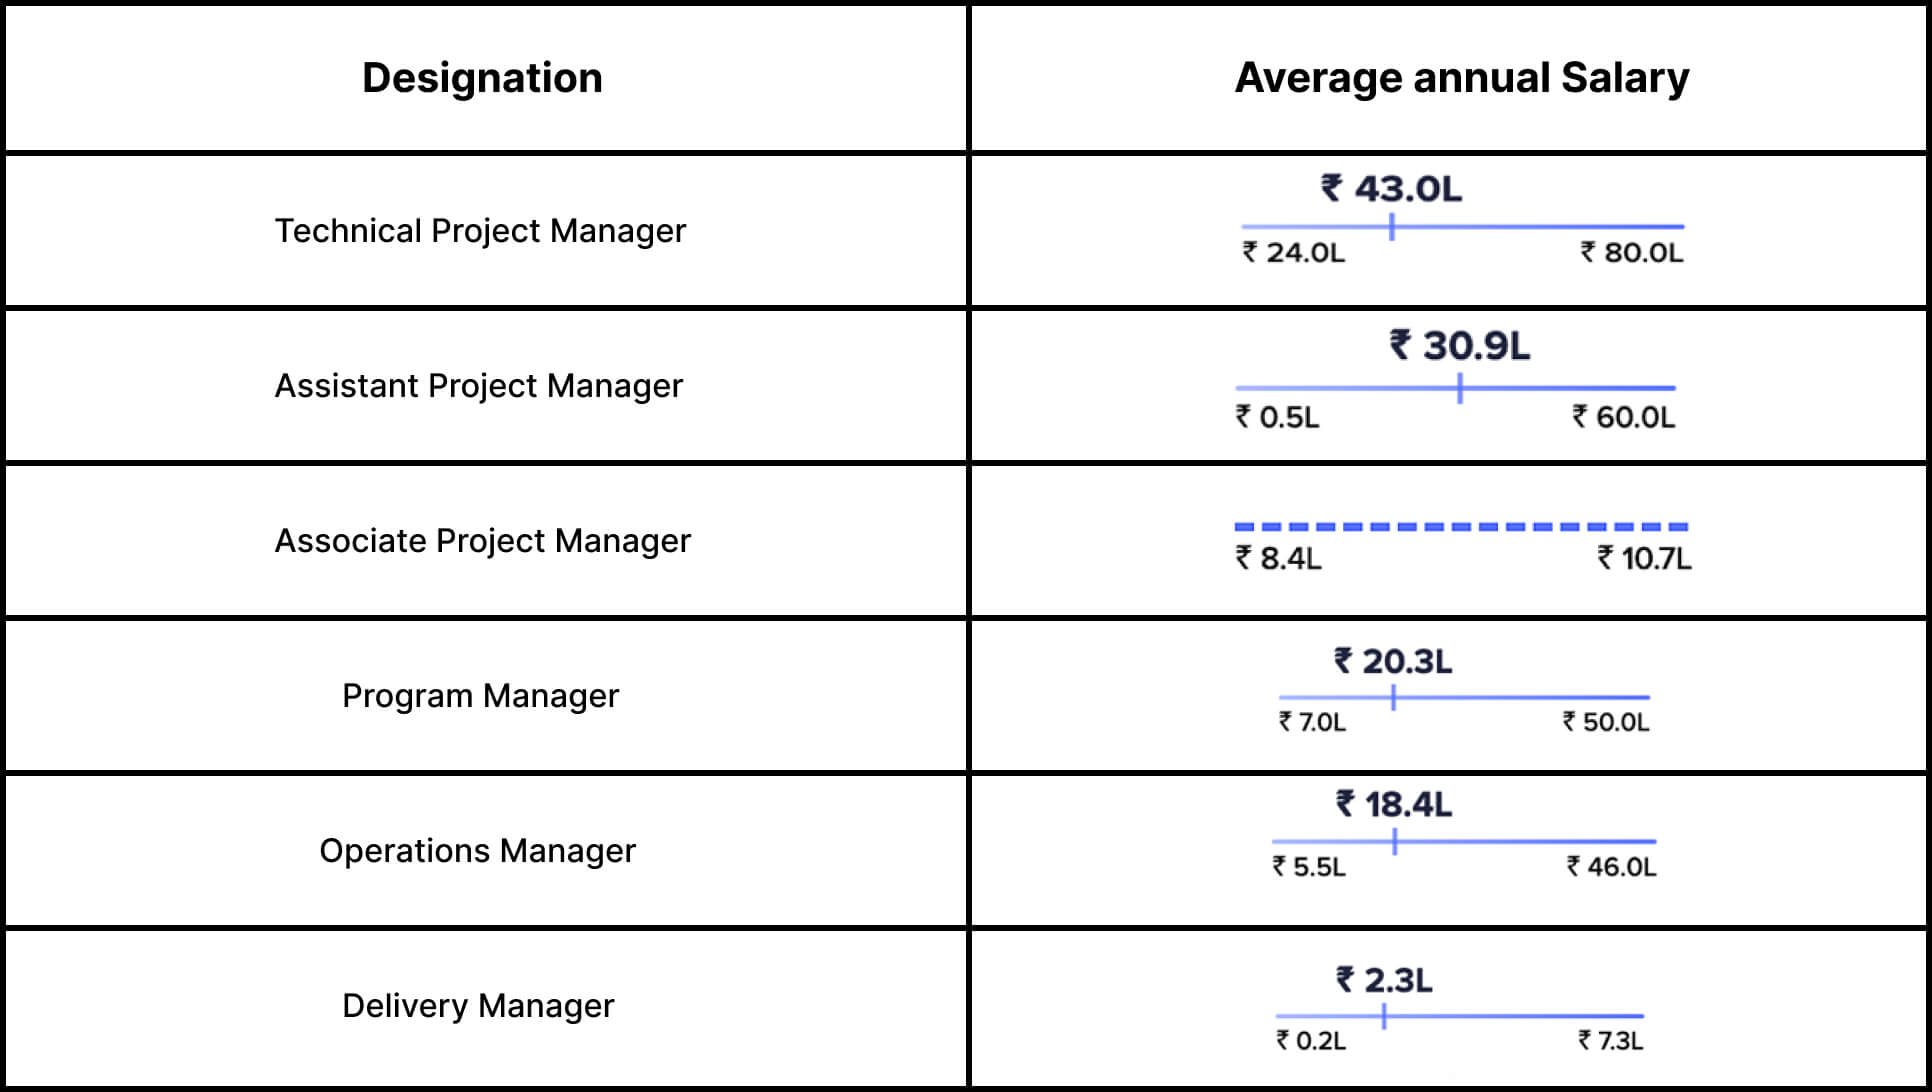 ambitionbox website screenshot showing project manager salaries at amazon based on job titles